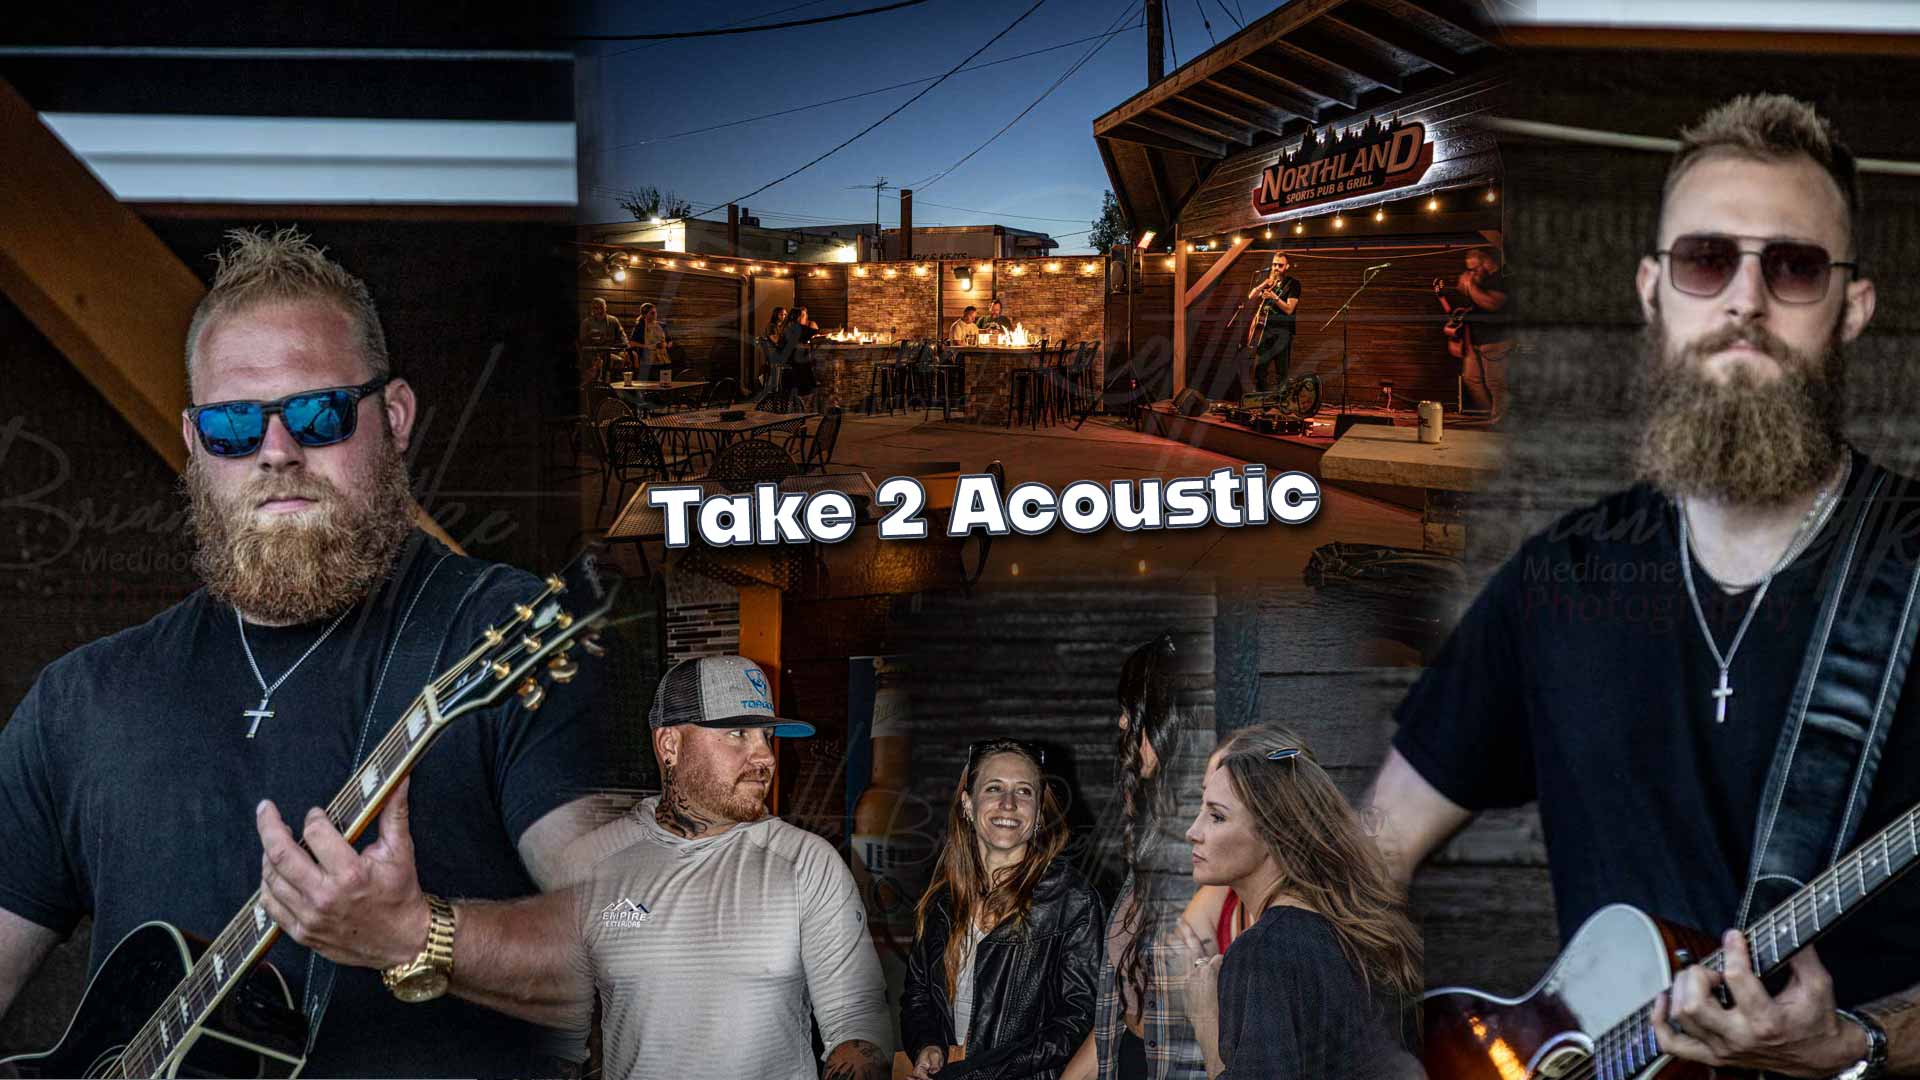 Take 2 Acoustic Show at Northland Sports Pub and Grill in Appleton Wisconsin